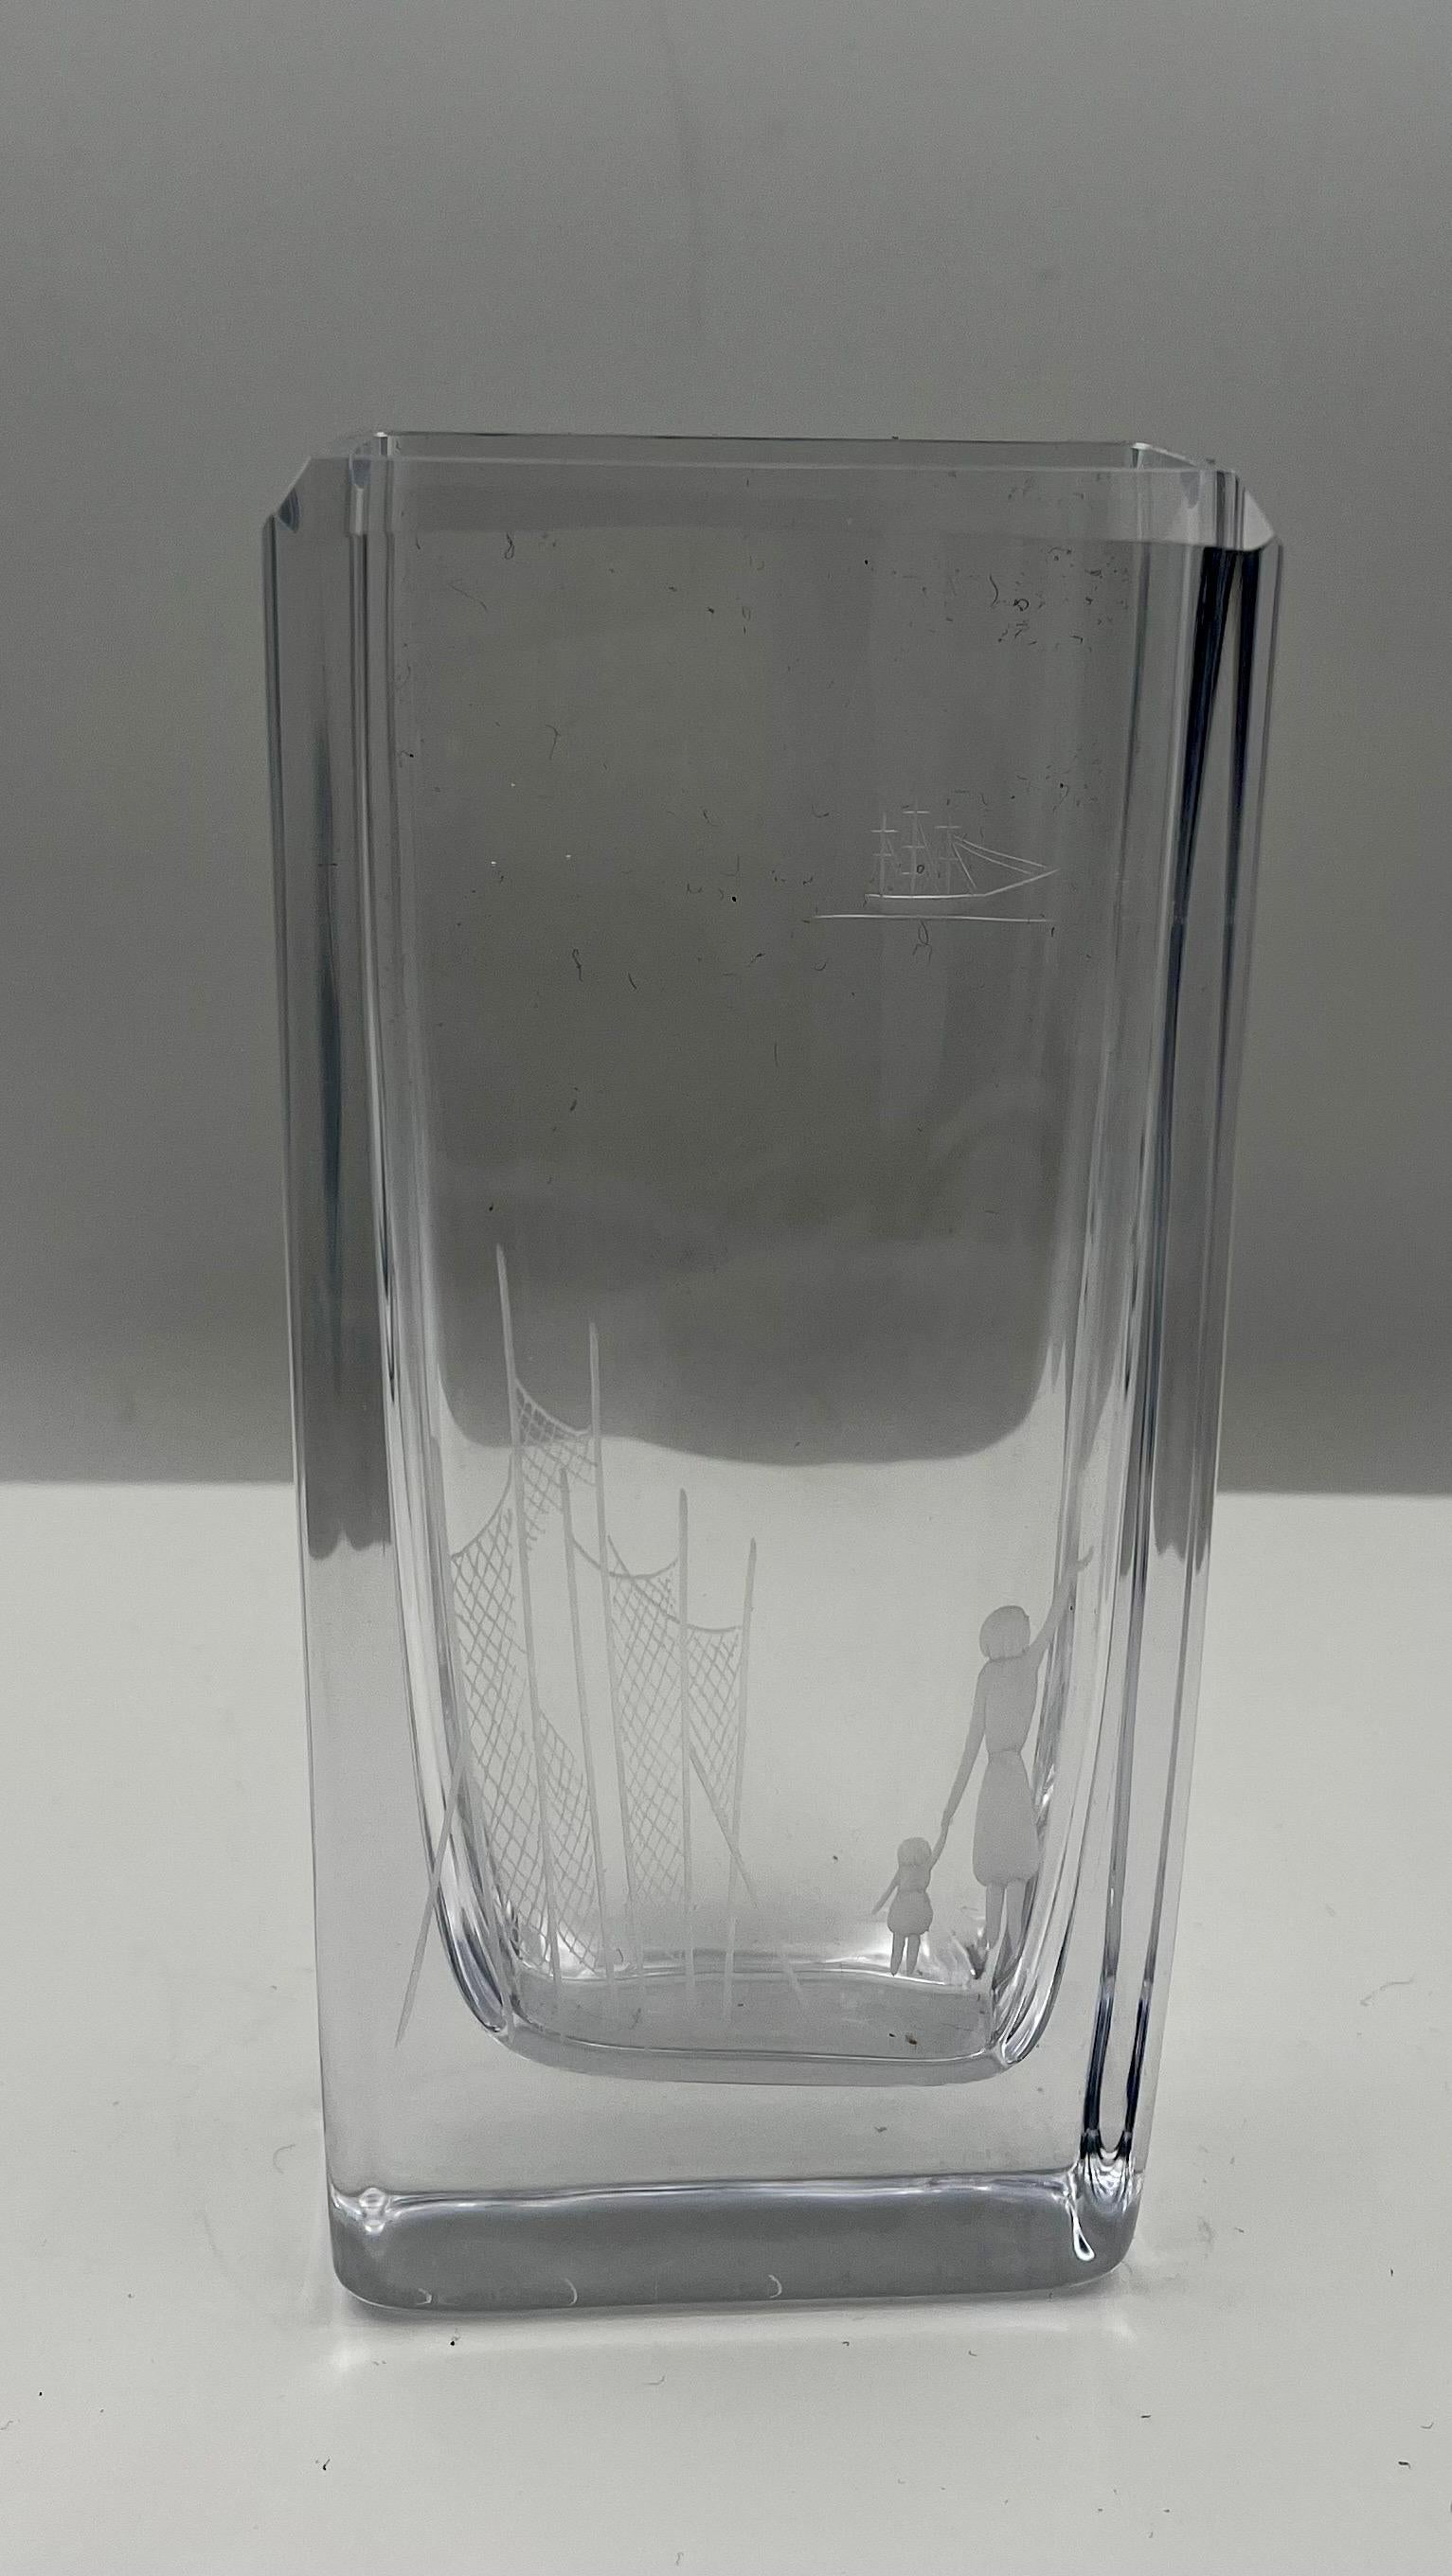 A beautiful signed by crystal Bengt Edenfalk Skruf vase was made in Sweden during the 1970s in a Mid-Century Modern style. excellent condition no chips or cracks, nice etching on both sides.